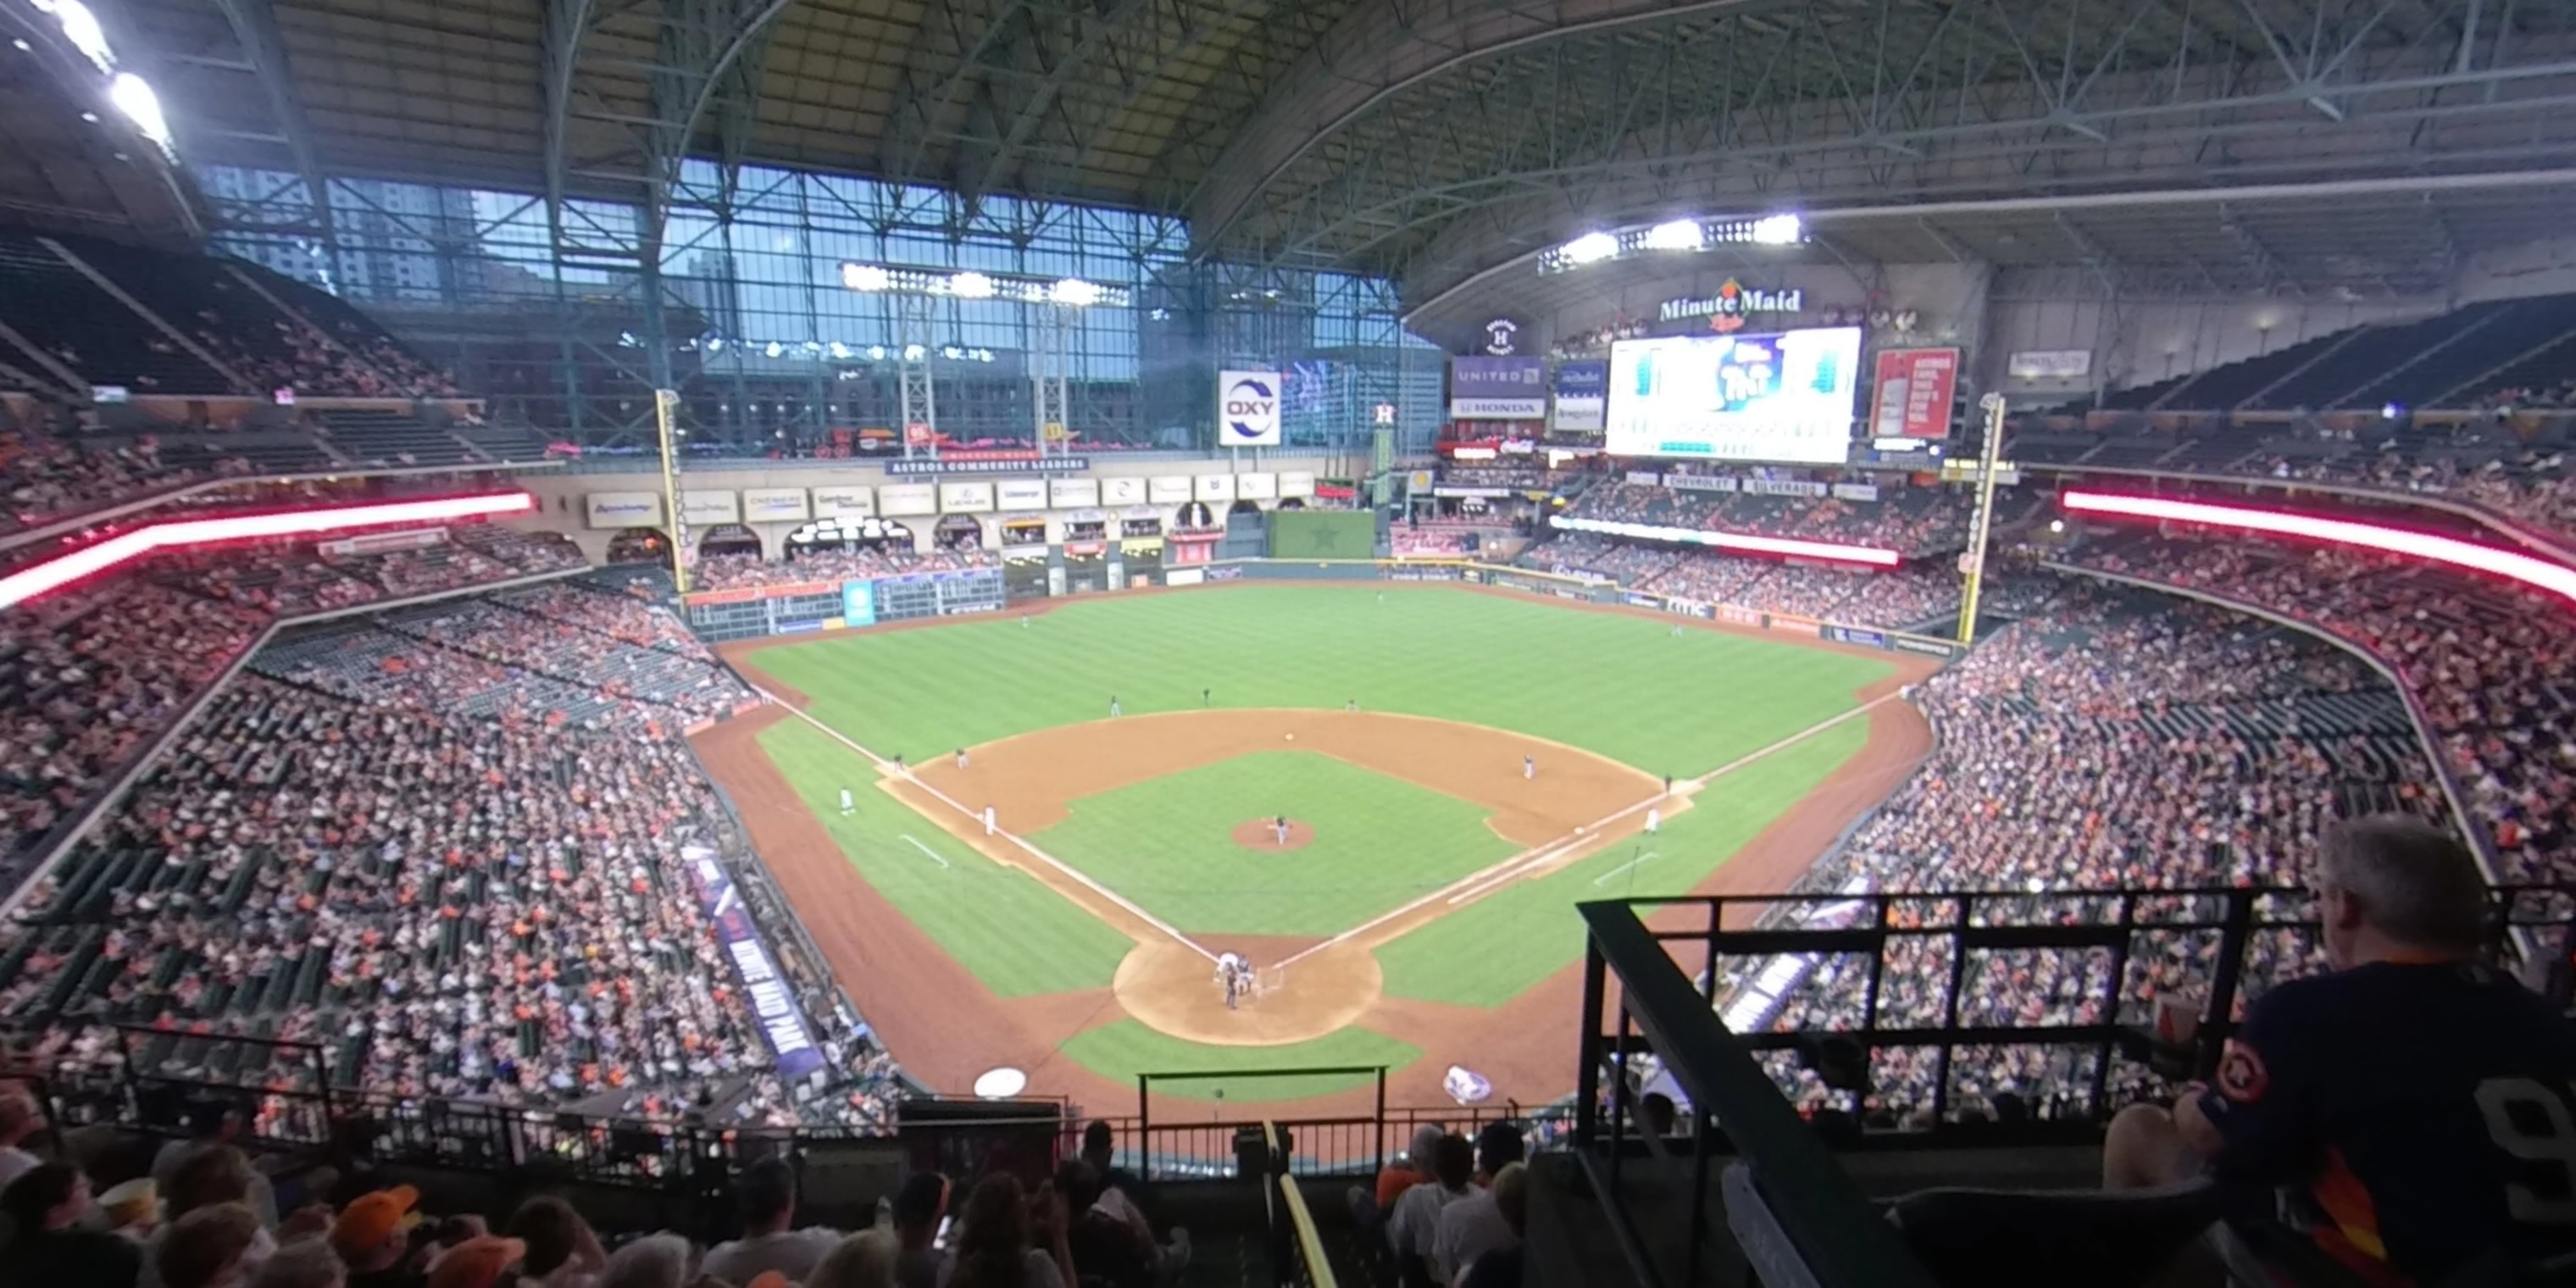 section 319 panoramic seat view  for baseball - minute maid park